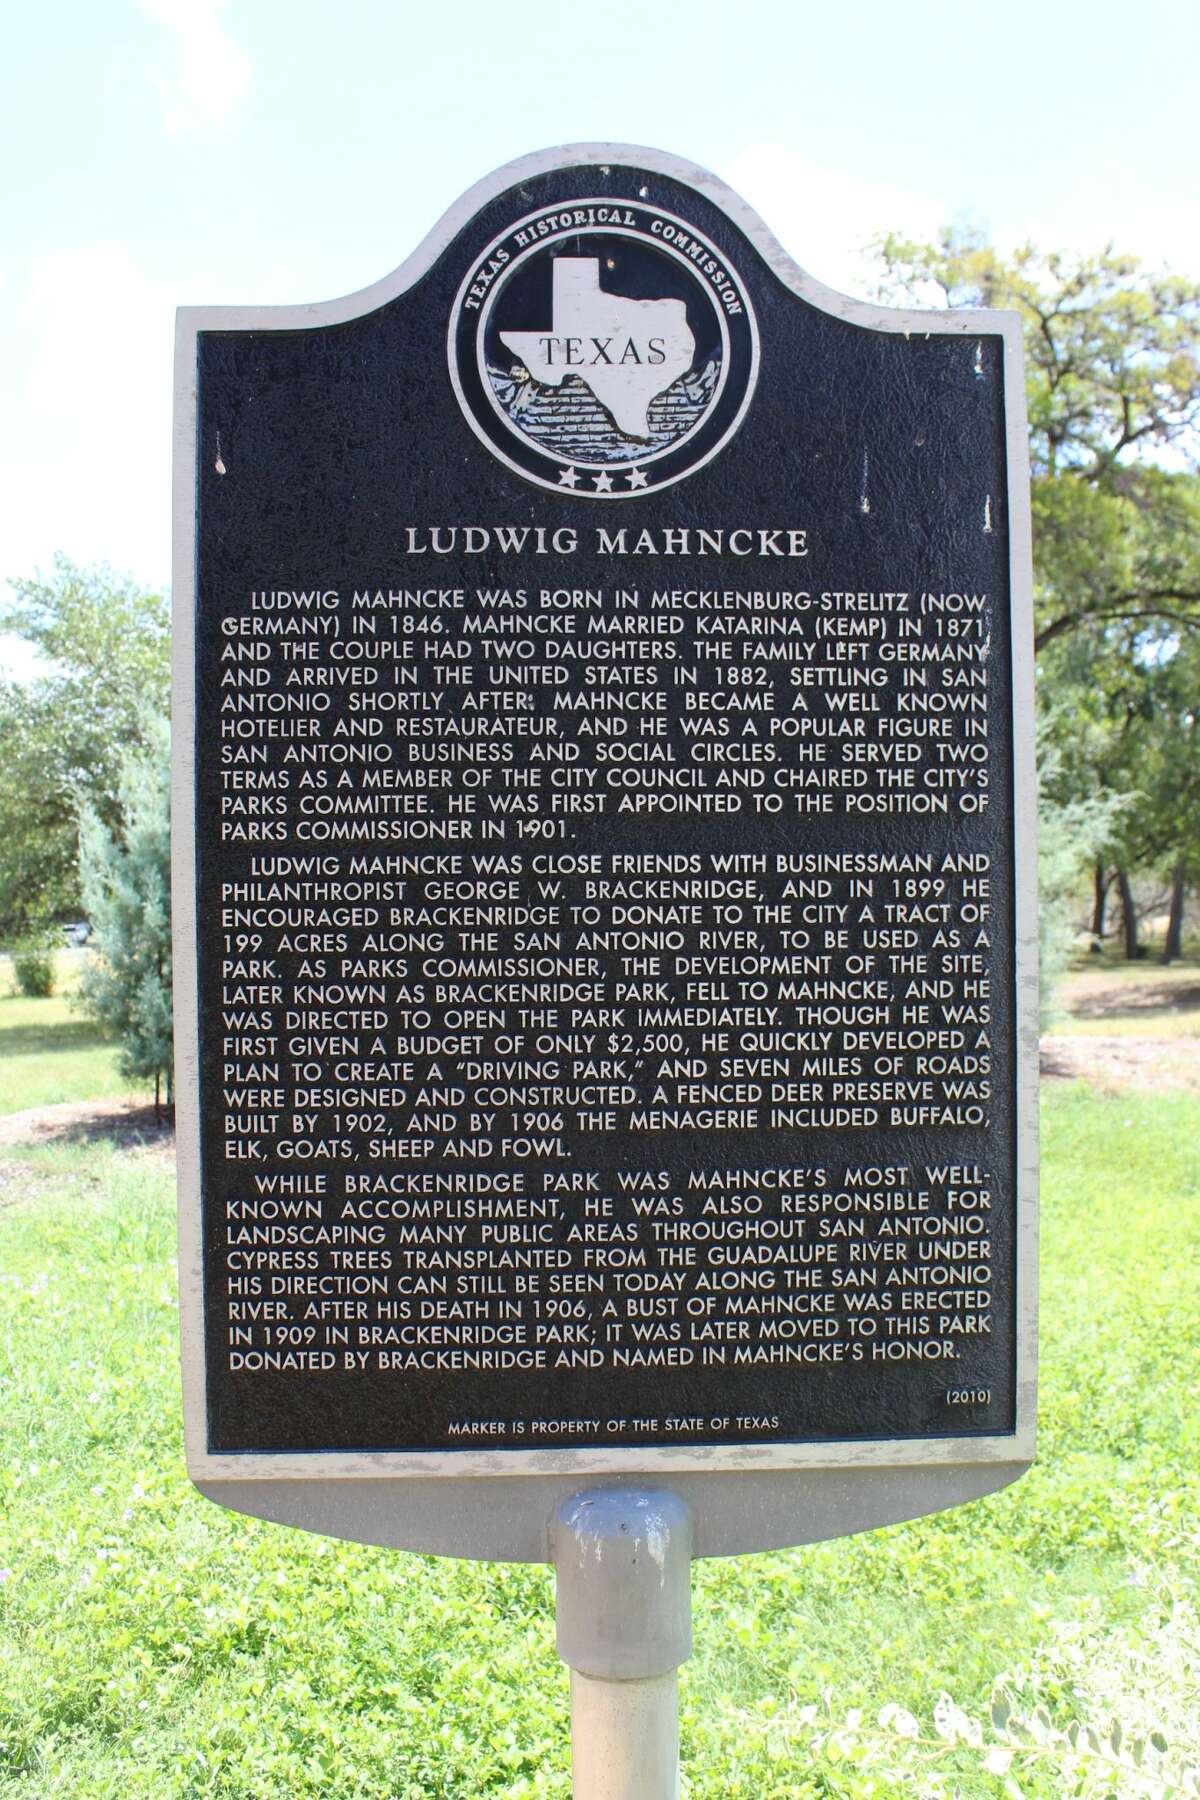 The midtown park was named in honor of Ludwig Mahncke, who served as San Antonio's park commissioner.